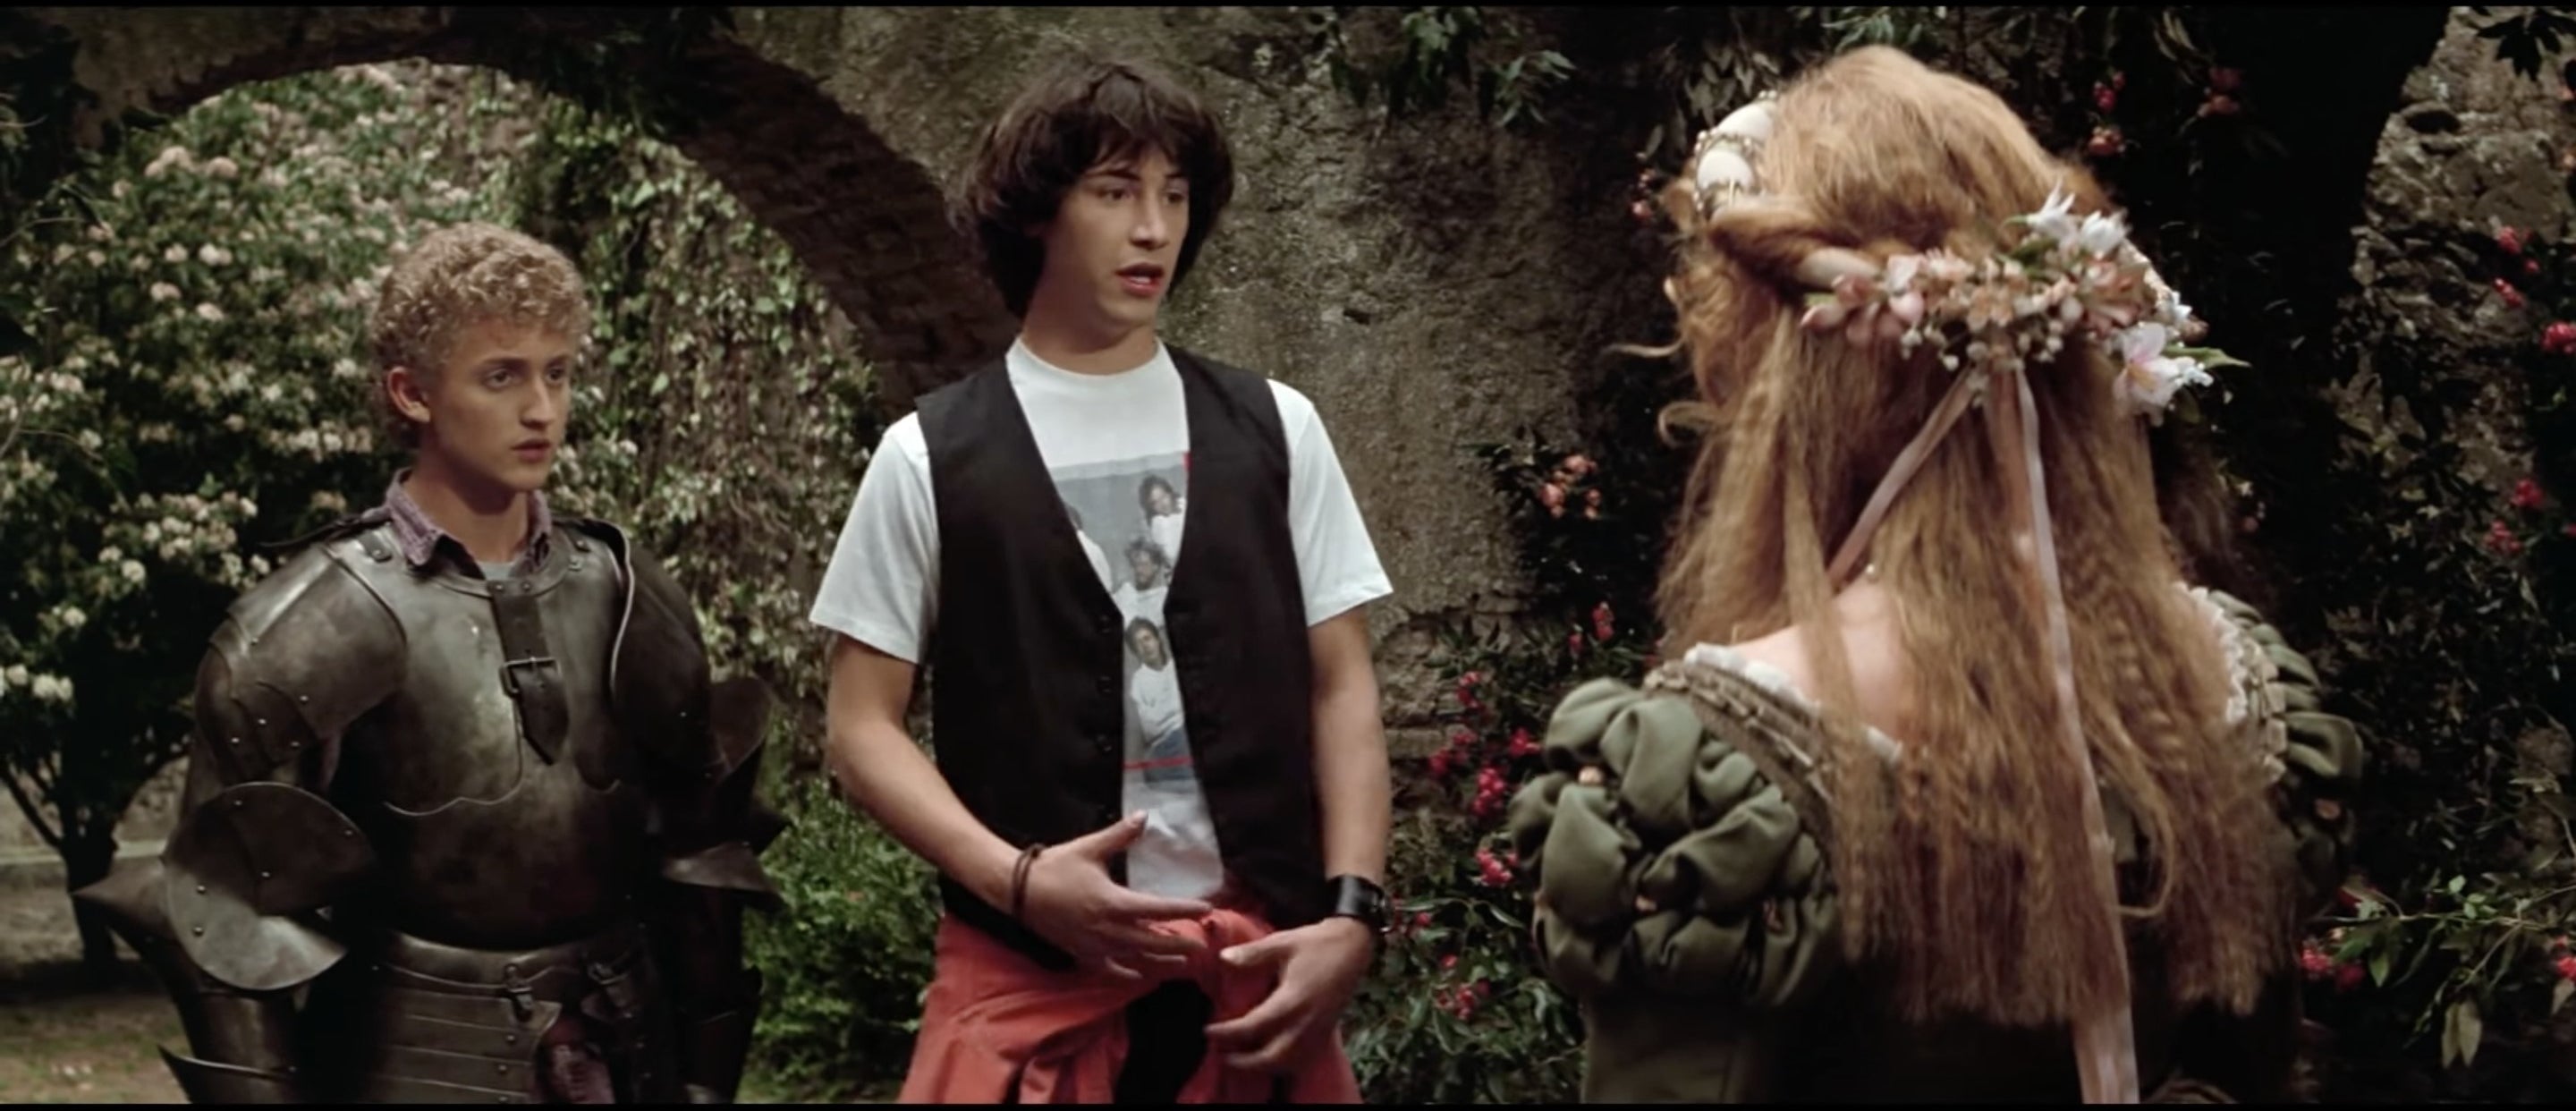 Bill and Ted talk to a woman in &quot;Bill and Ted&#x27;s Excellent Adventure&quot;